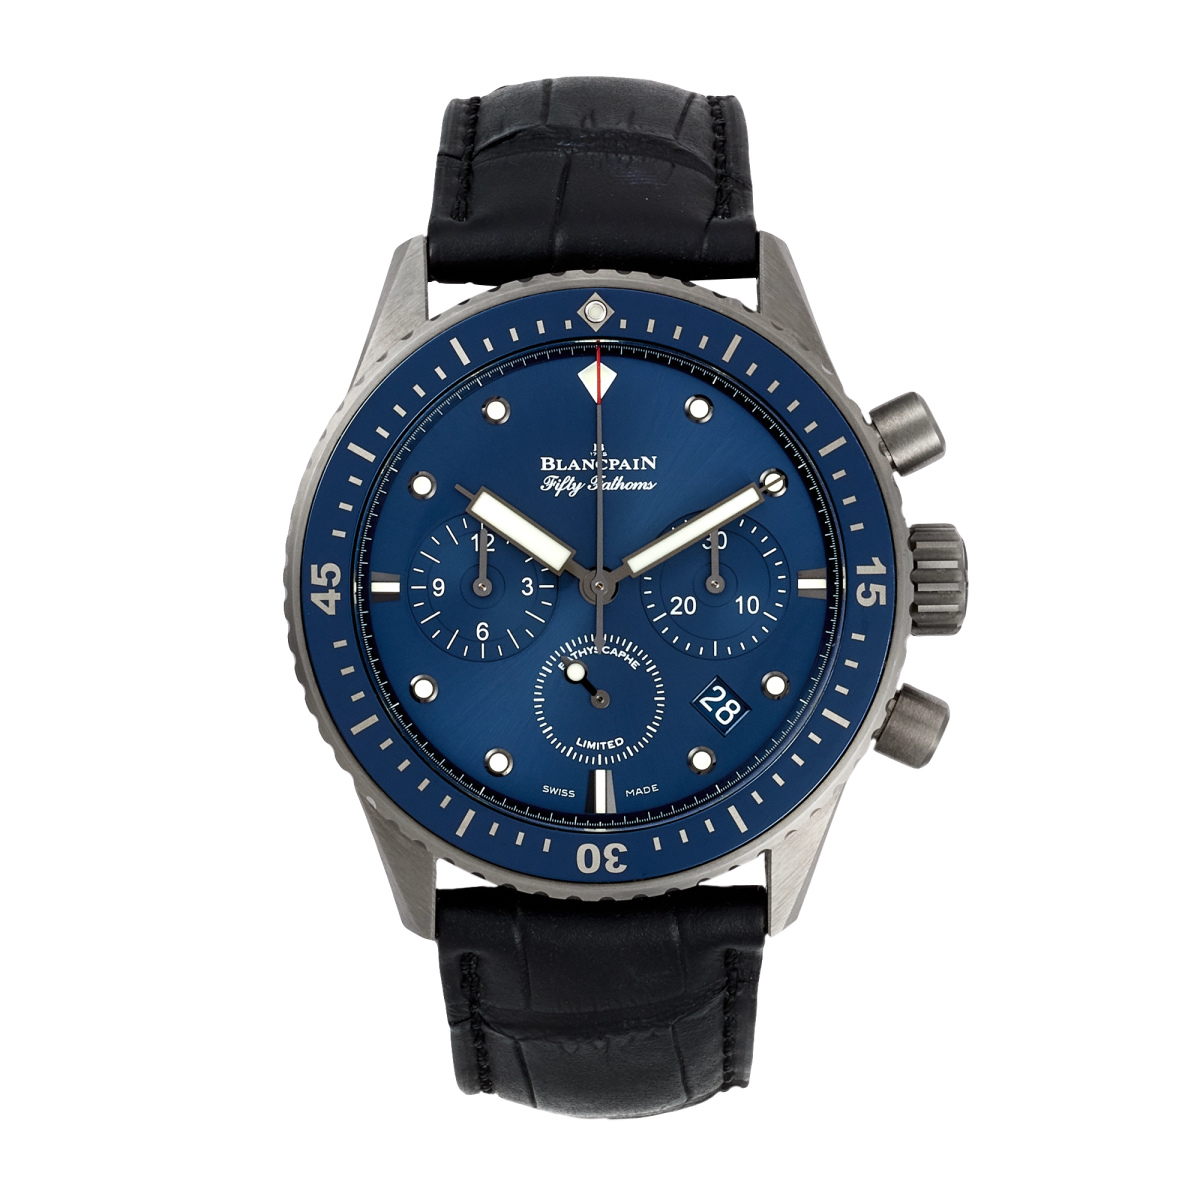 Fifty Fathoms Bathyscaphe Chronograph Flyback Ocean Commitment